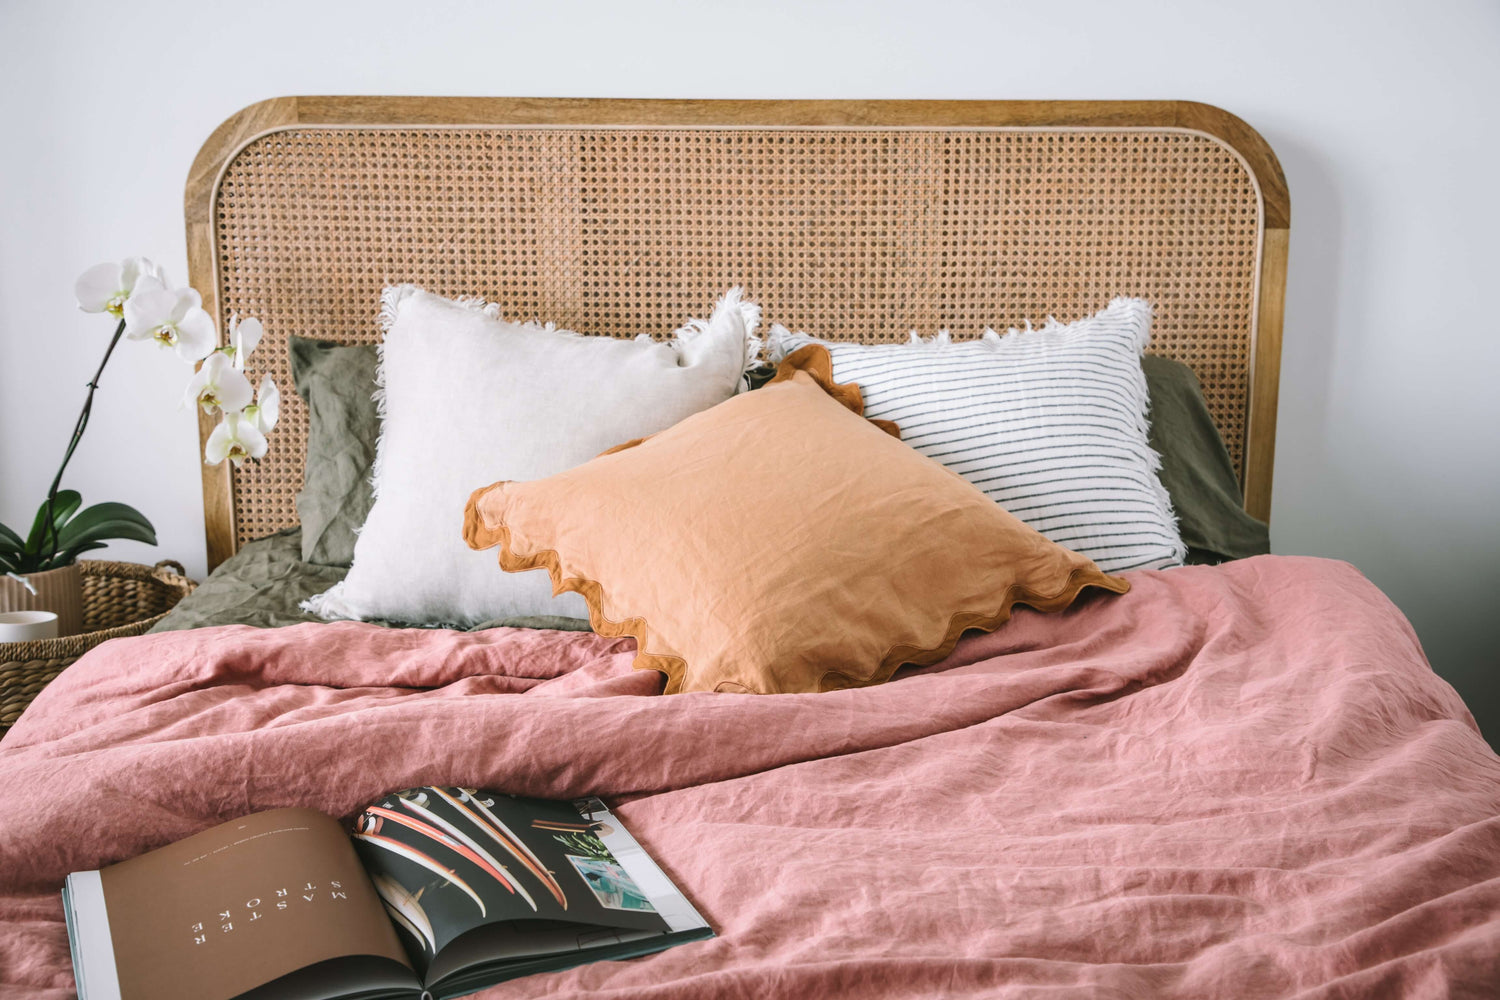 Beautifully styled bed with 100% European flax linen sheets and duvet cover in olive green and dusty pink. Styled with flax linen cushions with fringe and wave detailing